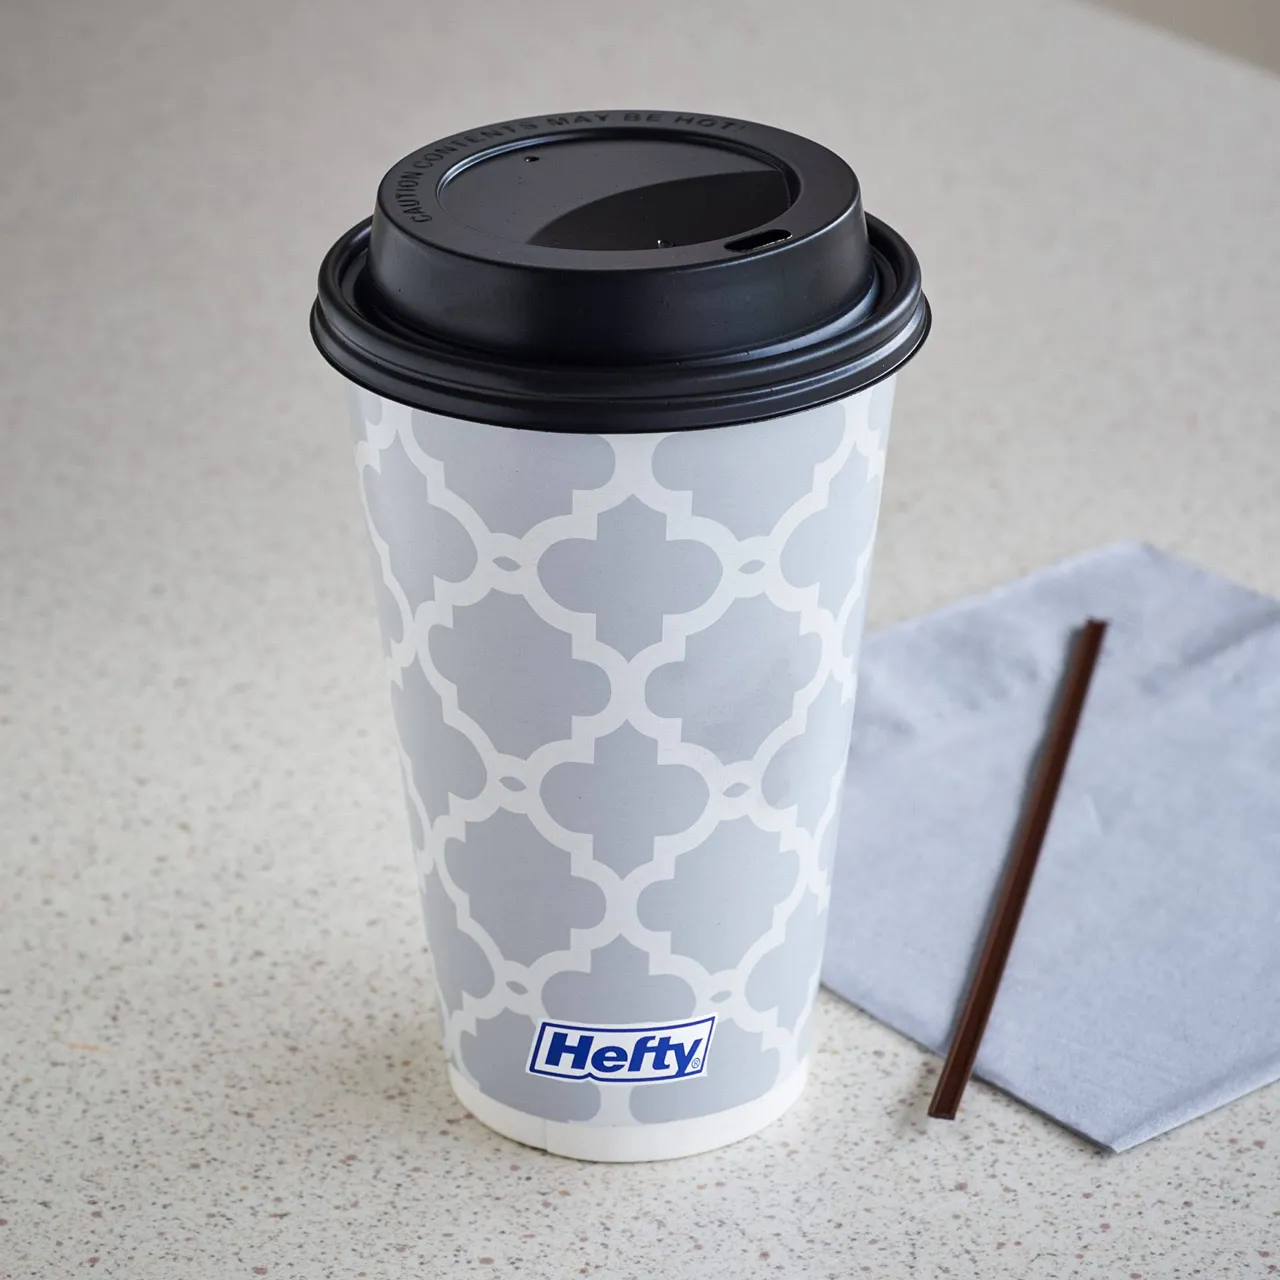 4 Hefty Paper Disposable Hot Cups with Lids, 16 Ounce, 20 Count